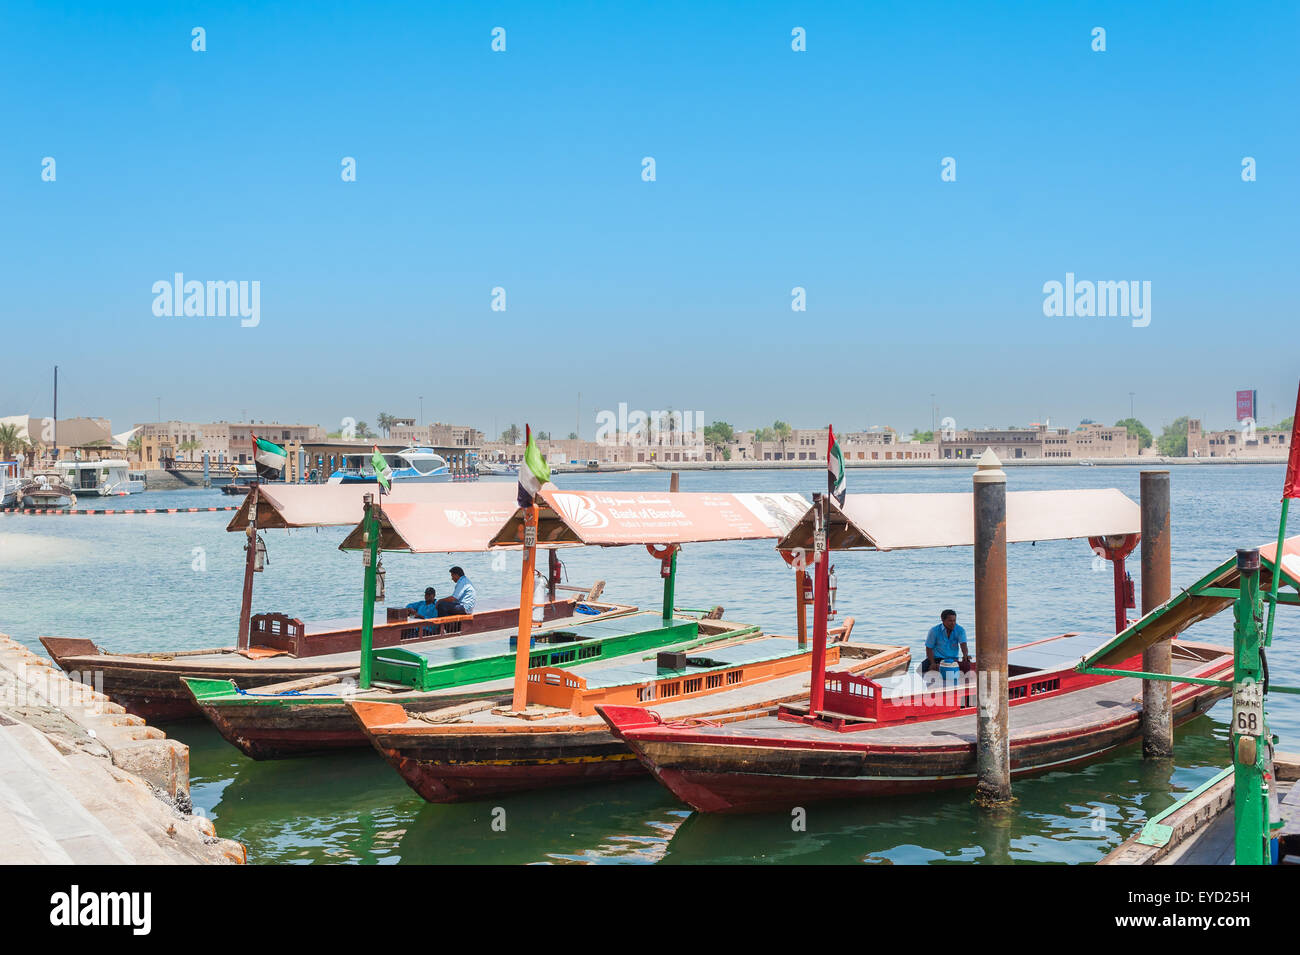 Dubai, UAE - 9 june 2015 : Features boats for the transport of persons on the river Creek in Dubai Stock Photo